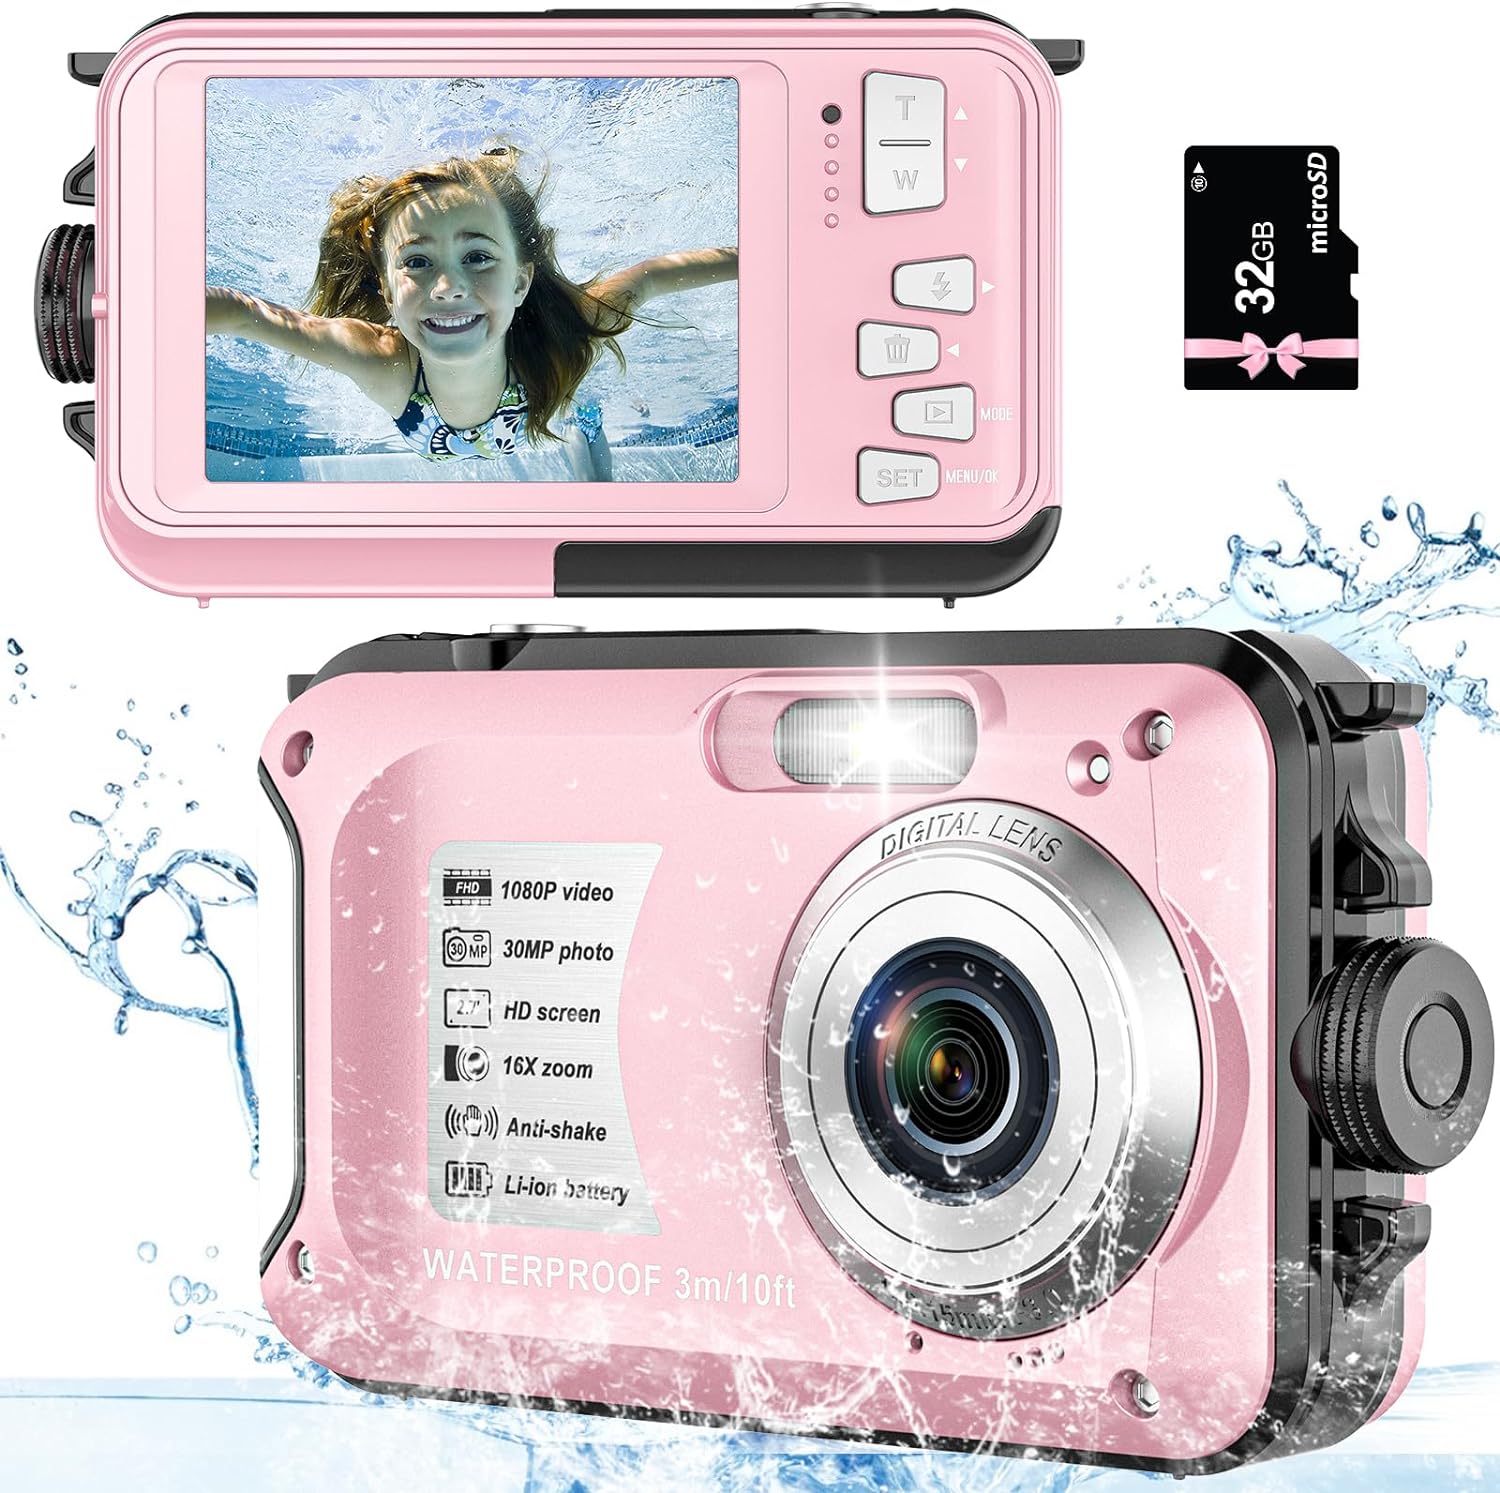 Underwater Camera Point and Shoot Waterproof Camera with 32GB Card 10FT 30MP 1080P FHD Video Compact Portable 16X Zoom Waterproof Digital Camera for Kids, Pink